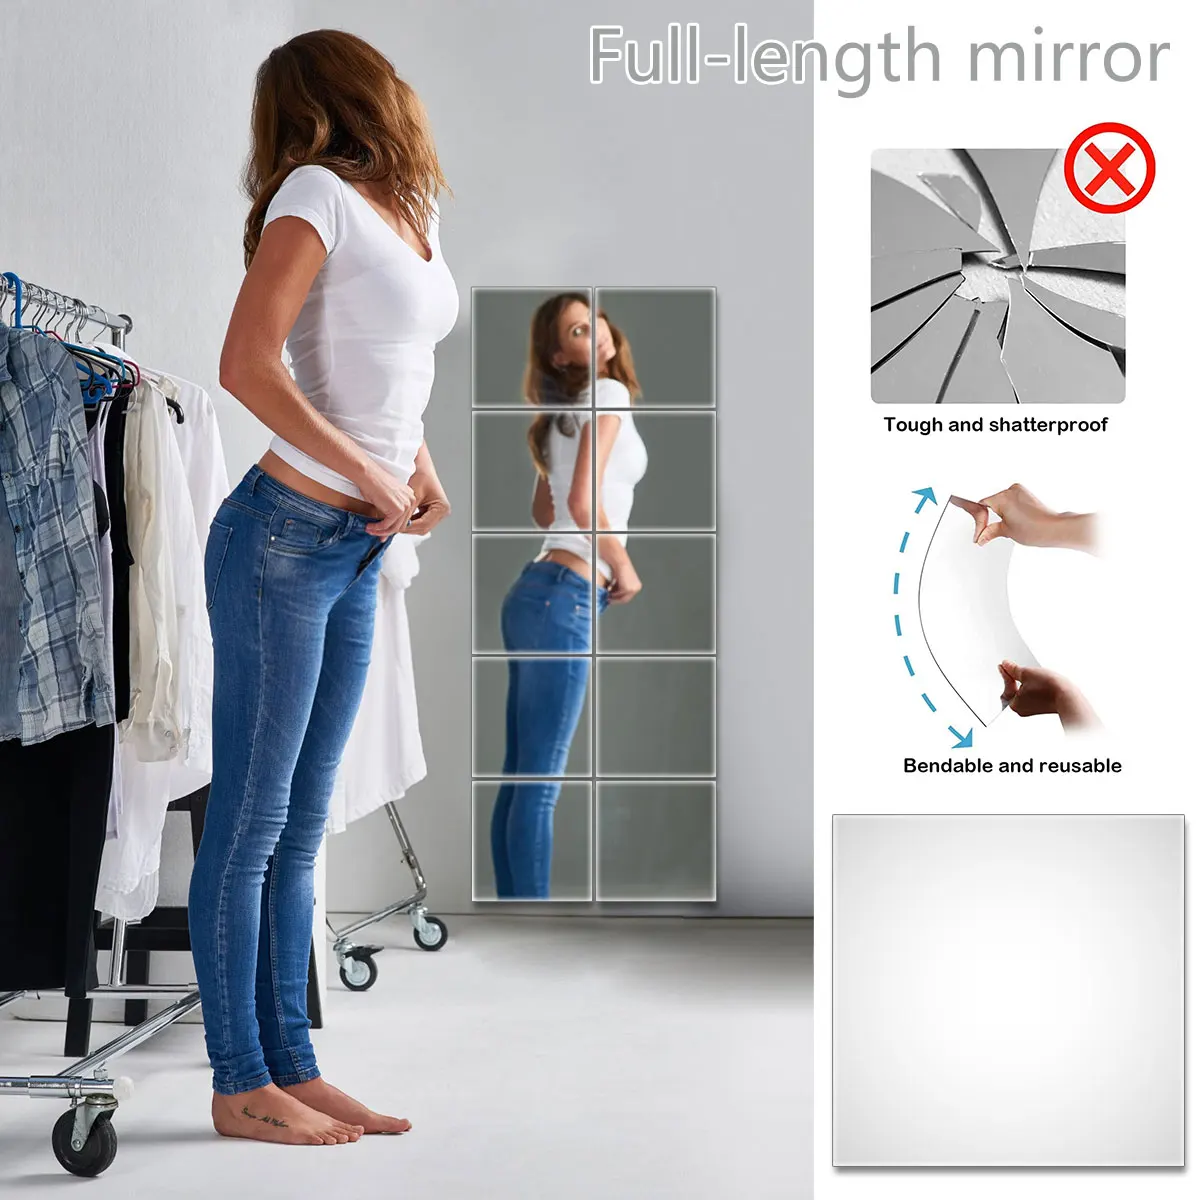 10Pcs Mirror Sheets Self Adhesive Non Glass Mirror Ultra-thin Flexible  Mirror Sheets DIY Tiles Mirror Stickers for Home Bedroom - AliExpress